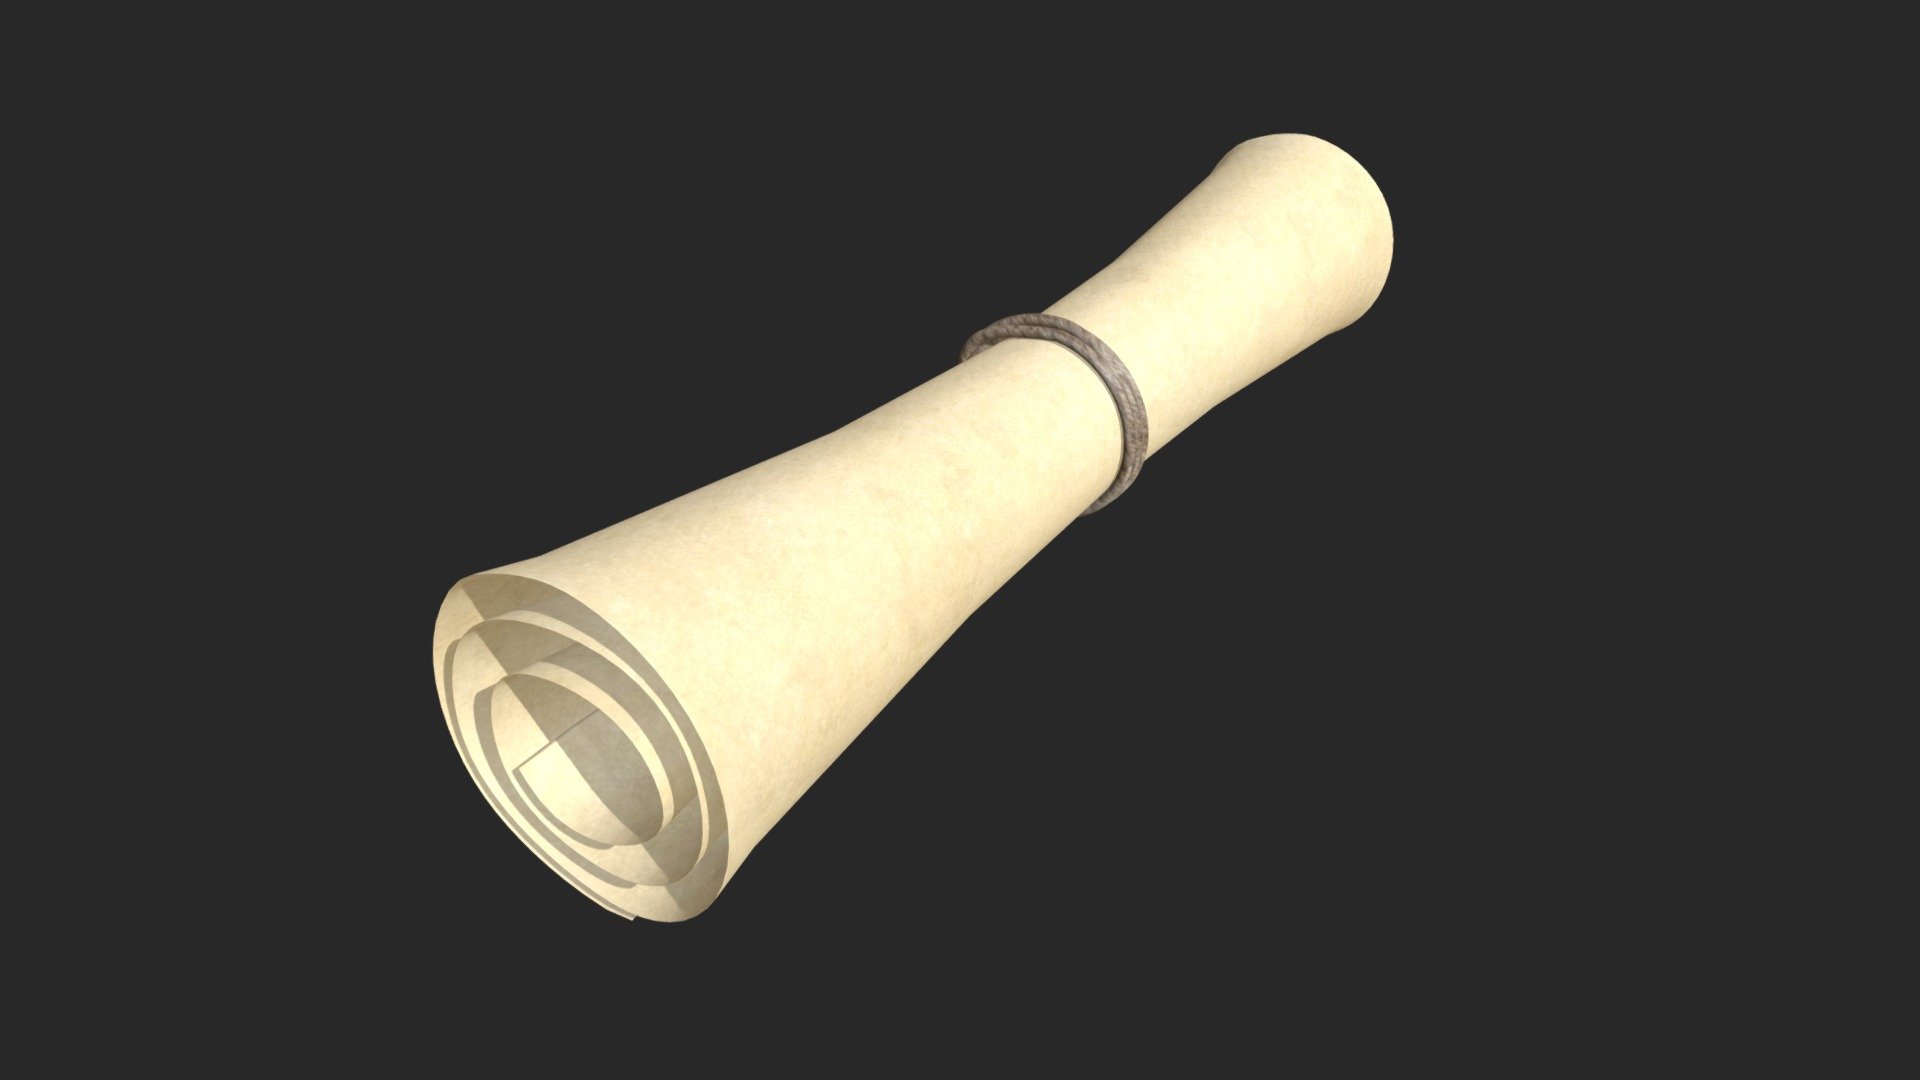 === The following description refers to the additional ZIP package provided with this model ===

Rolled up paper scroll 3D Model. 2 individual objects (scroll, cord), sharing the same non overlapping UV Layout map, Material and PBR Textures set. Production-ready 3D Model, with PBR materials, textures, non overlapping UV Layout map provided in the package.

Quads only geometries (no tris/ngons).

Formats included: FBX, OBJ; scenes: BLEND (with Cycles / Eevee PBR Materials and Textures); other: 16-bit PNGs with Alpha.

2 Objects (meshes), 1 PBR Material, UV unwrapped (non overlapping UV Layout map provided in the package); UV-mapped Textures.

UV Layout maps and Image Textures resolutions: 2048x2048; PBR Textures made with Substance Painter.

Polygonal, QUADS ONLY (no tris/ngons); 6462 vertices, 6458 quad faces (12916 tris).

Real world dimensions; scene scale units: cm in Blender 3.6.7 LTS (that is: Metric with 0.01 scale).

Uniform scale object (scale applied in Blender 3.6.7 LTS) 3d model